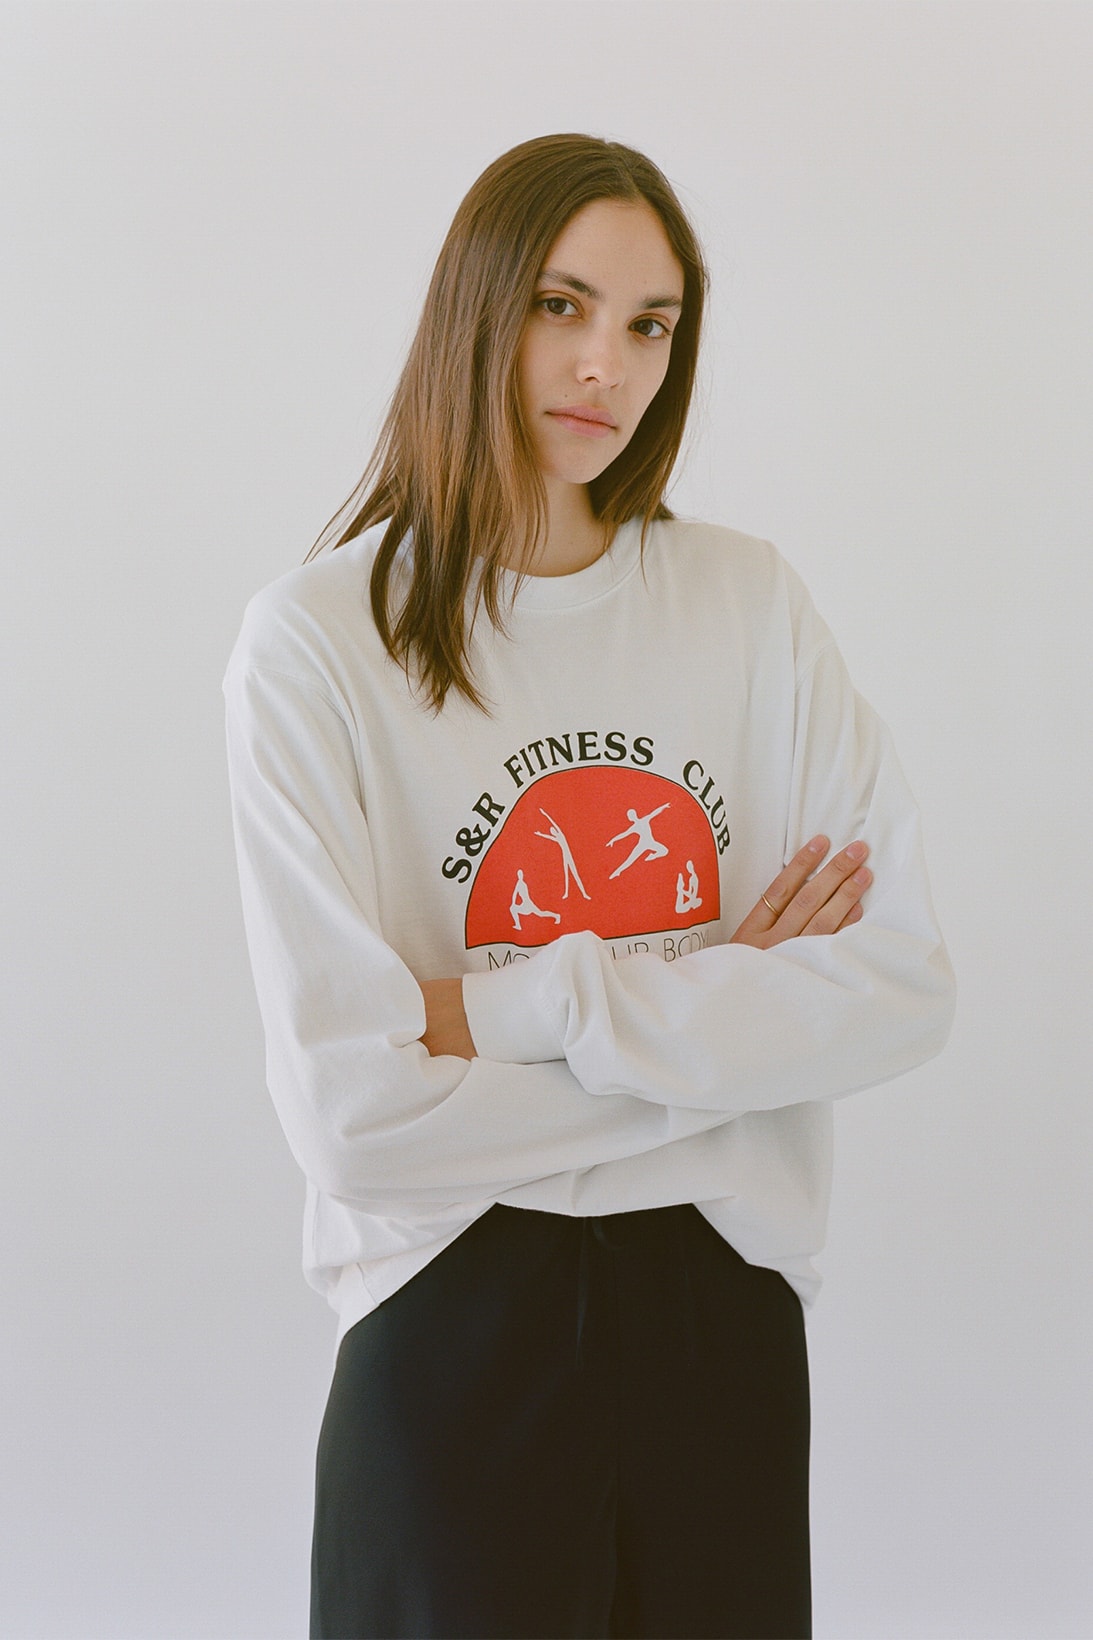 emily oberg sporty and rich spring collection drop 3 wellness club health sweaters 